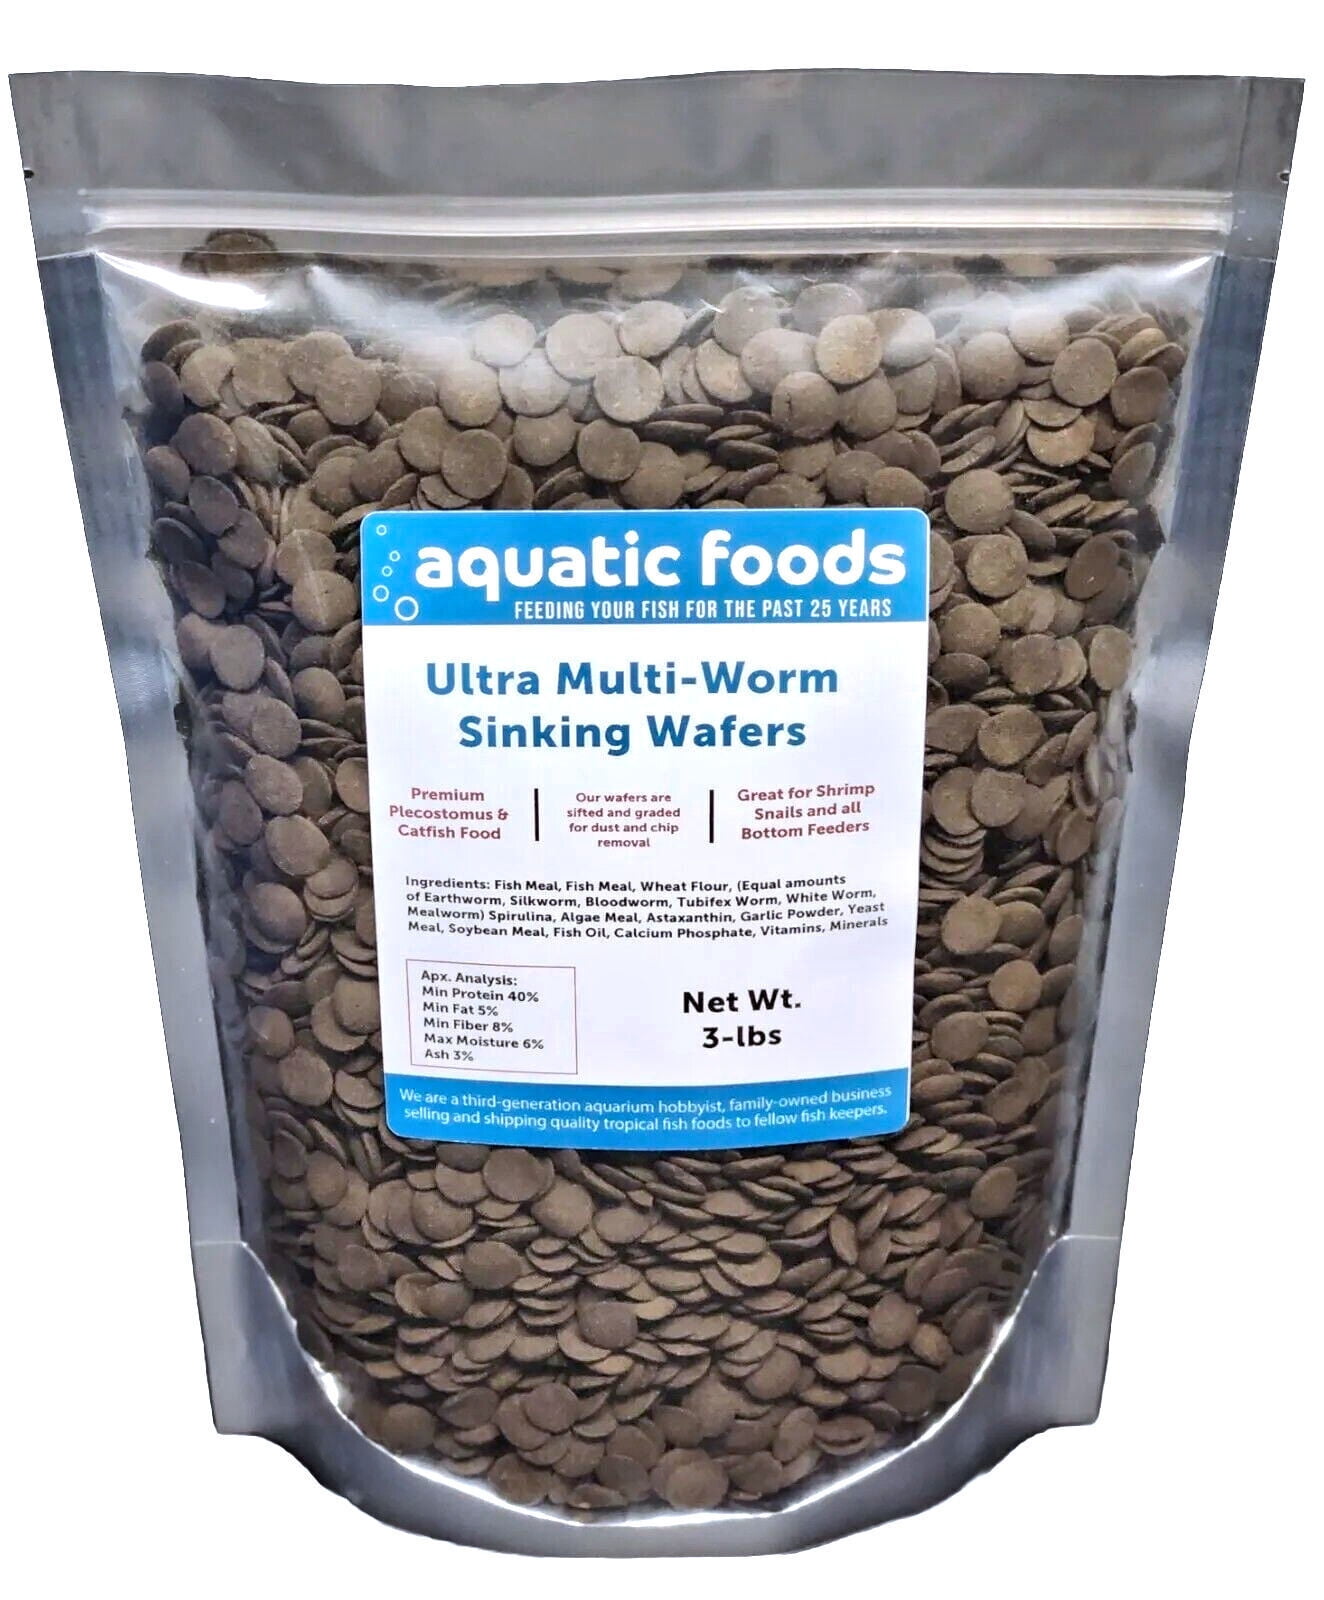 Ultra Multi-Worm 1/2 Sinking Wafers of 6-Types of Worms. Ideal for Bottom  Fish, Plecos, Shrimp, Snails, Crayfish, All Herbivorous and Omnivorous  Tropical Fish3-lb Bag 